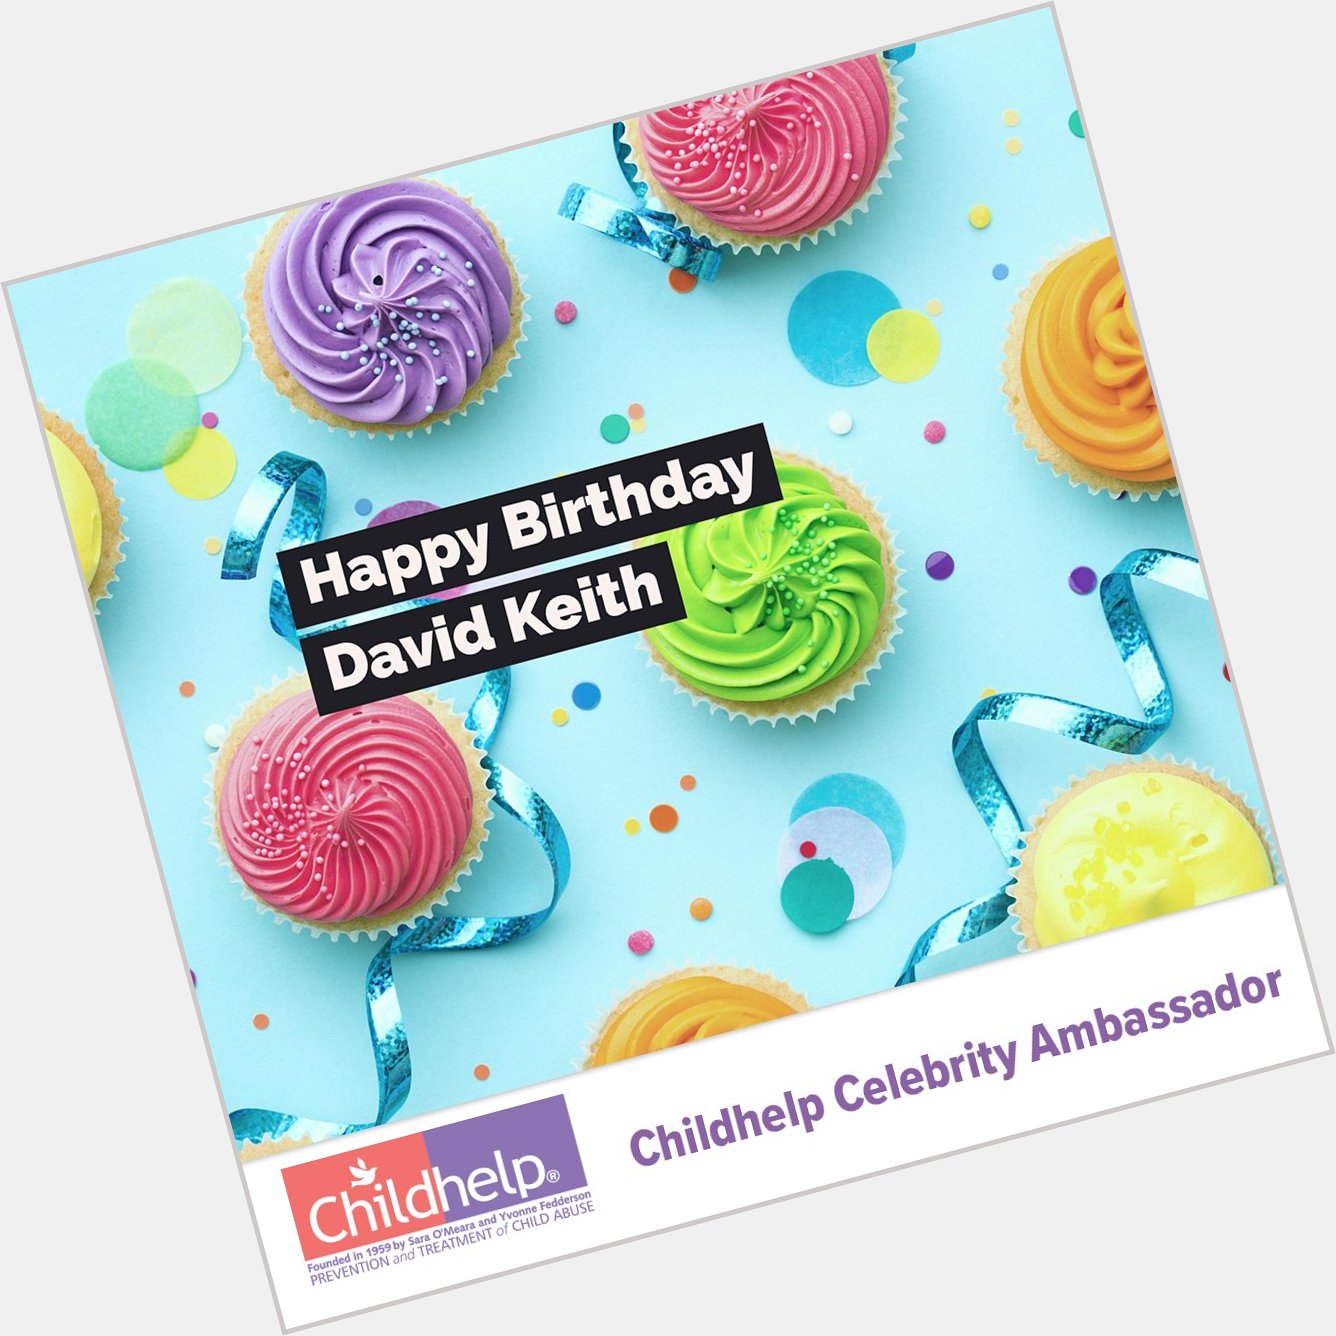 Happy 63rd birthday to Childhelp Celebrity Ambassador and actor David Keith! Have an amazing day! 